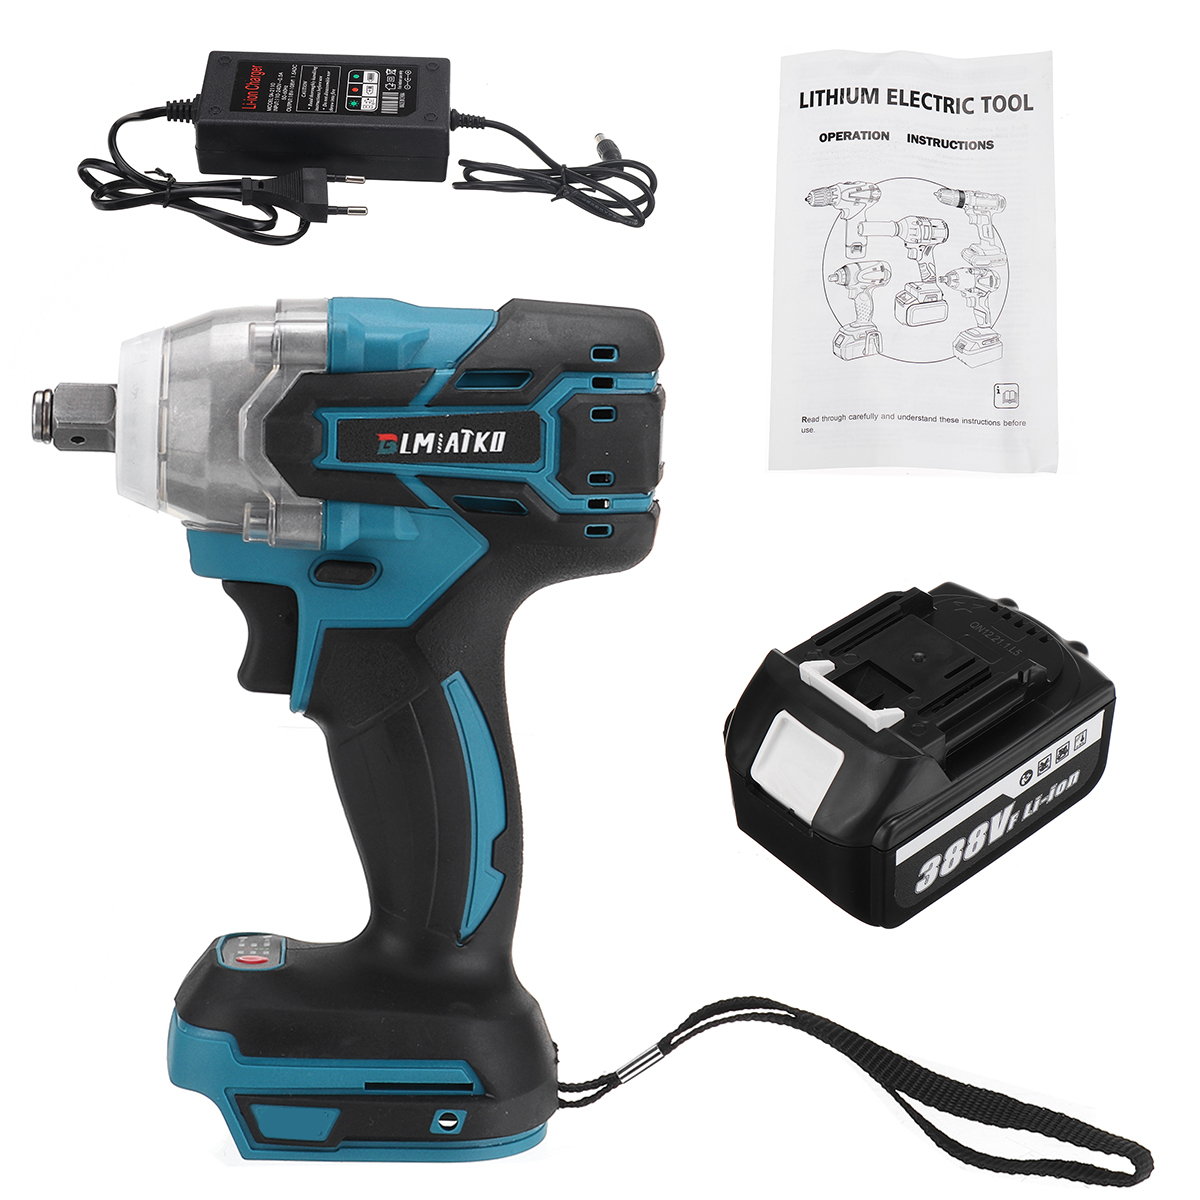 BLMIATKO-388VF-520Nm-Electric-Brushless-Impact-Wrench-Rechargeable-Woodworking-Maintenance-Tool-with-1919212-17